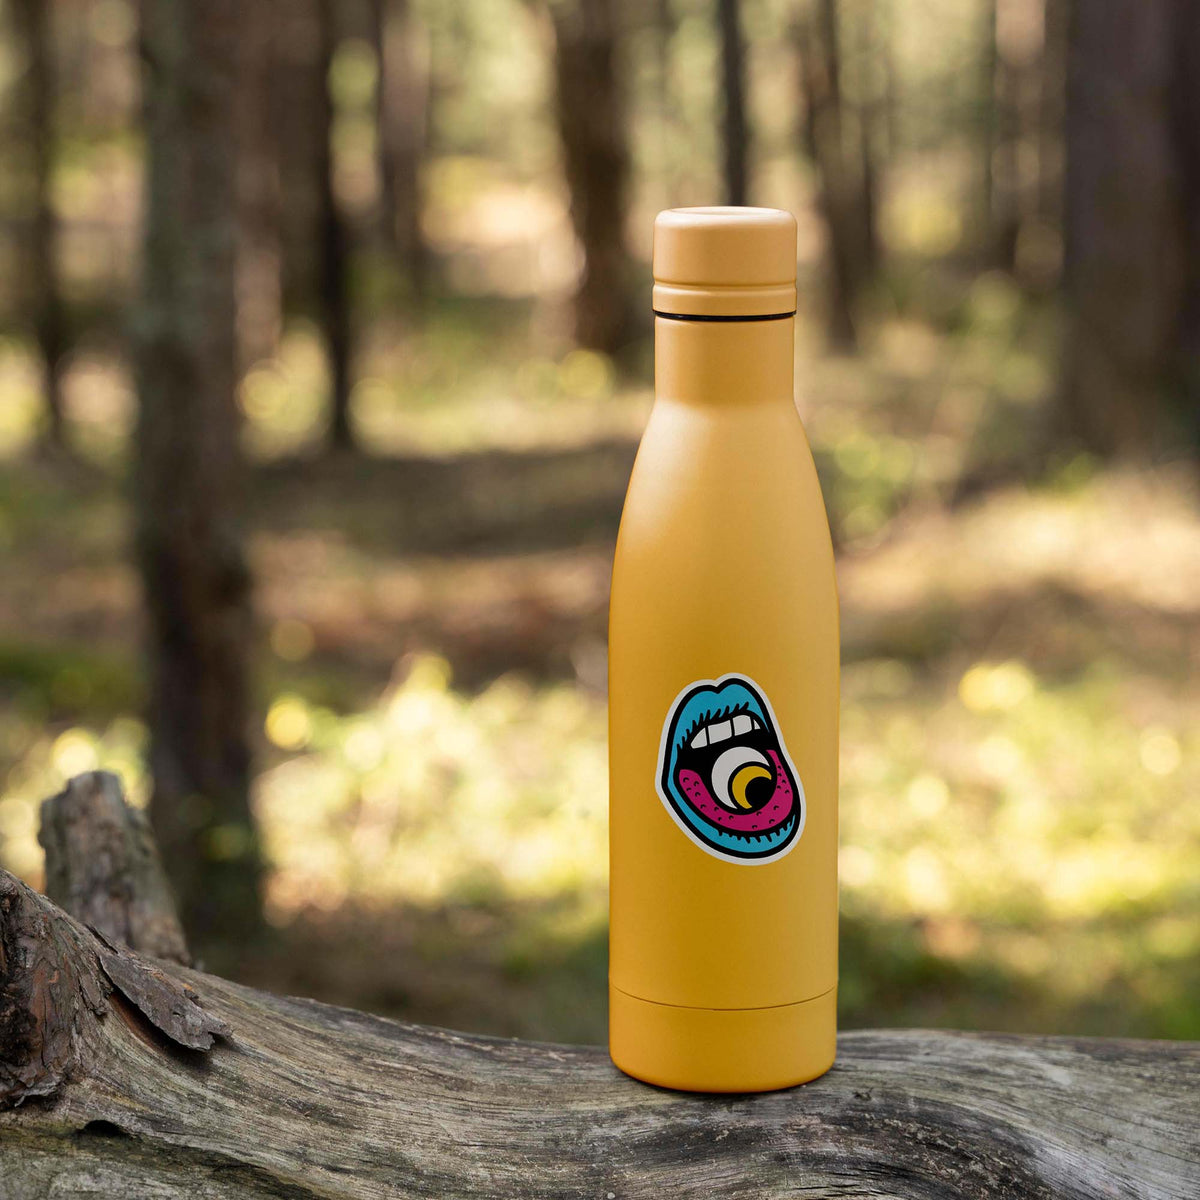 An Eye In Mouth Sticker water bottle sits on a log in the woods.